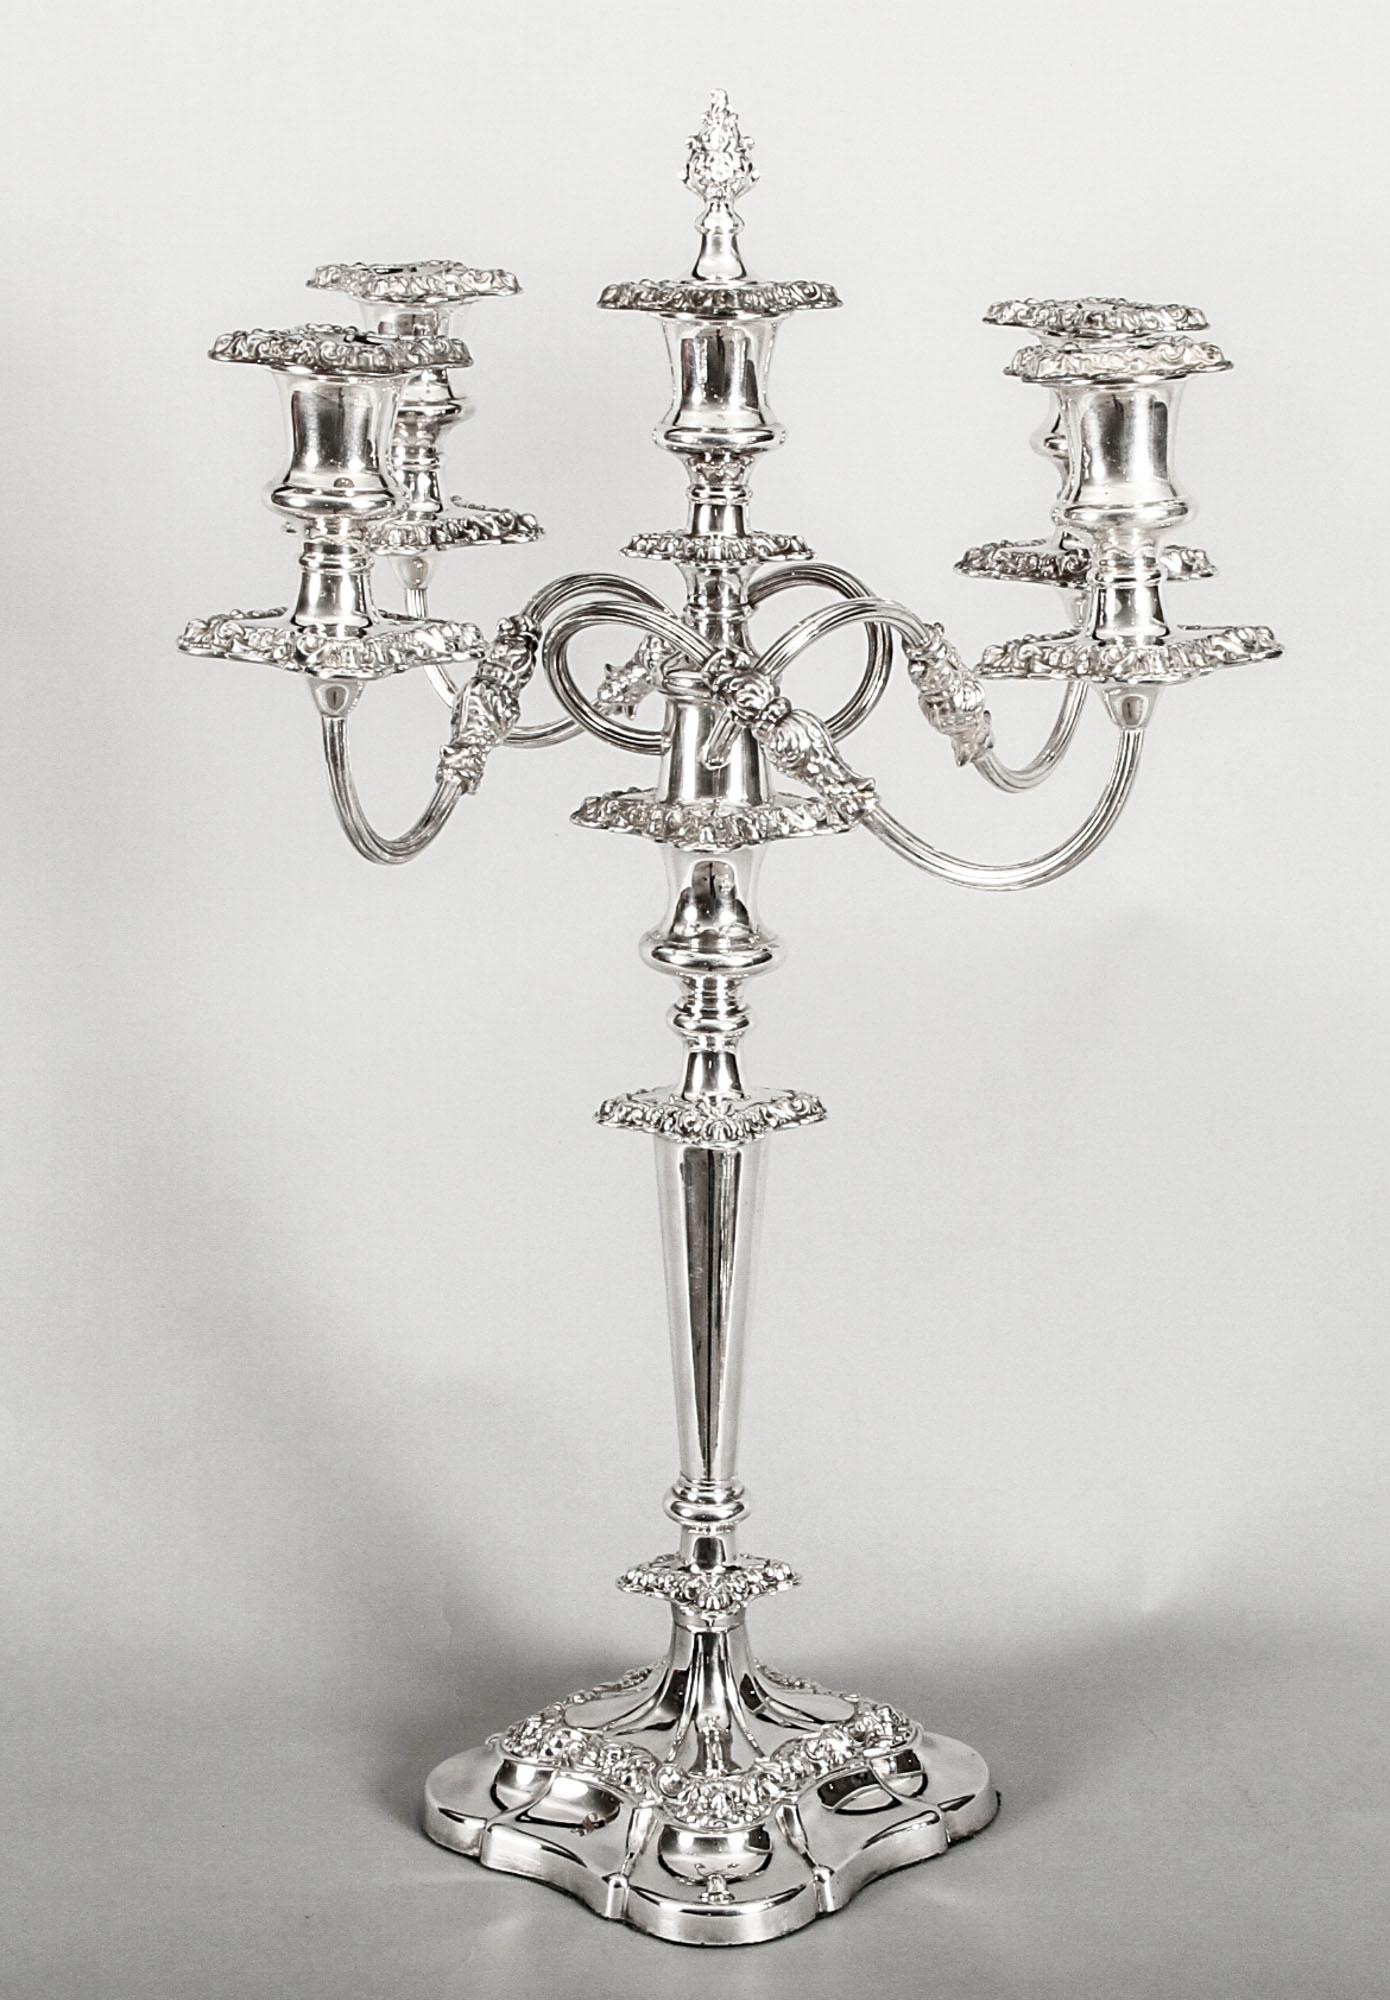 Edwardian Antique Pair of Five-Light Candelabra by Mappin & Webb, 19th Century